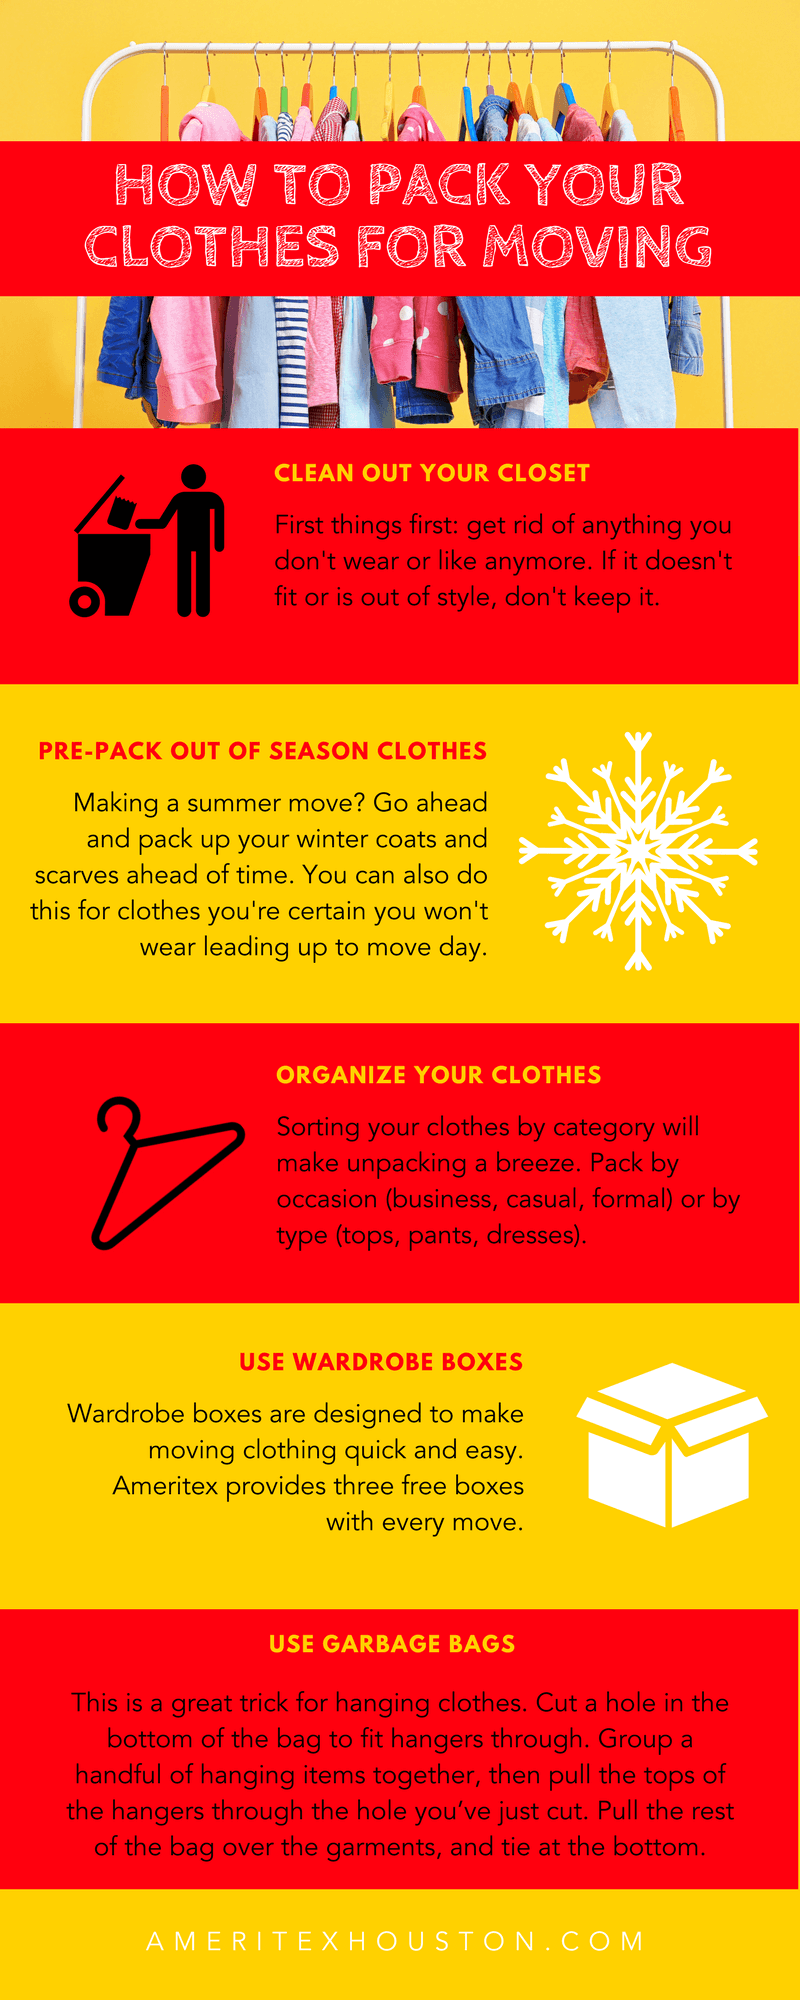 https://ameritexhouston.com/wp-content/uploads/2017/07/how-to-pack-clothes-3-1.png